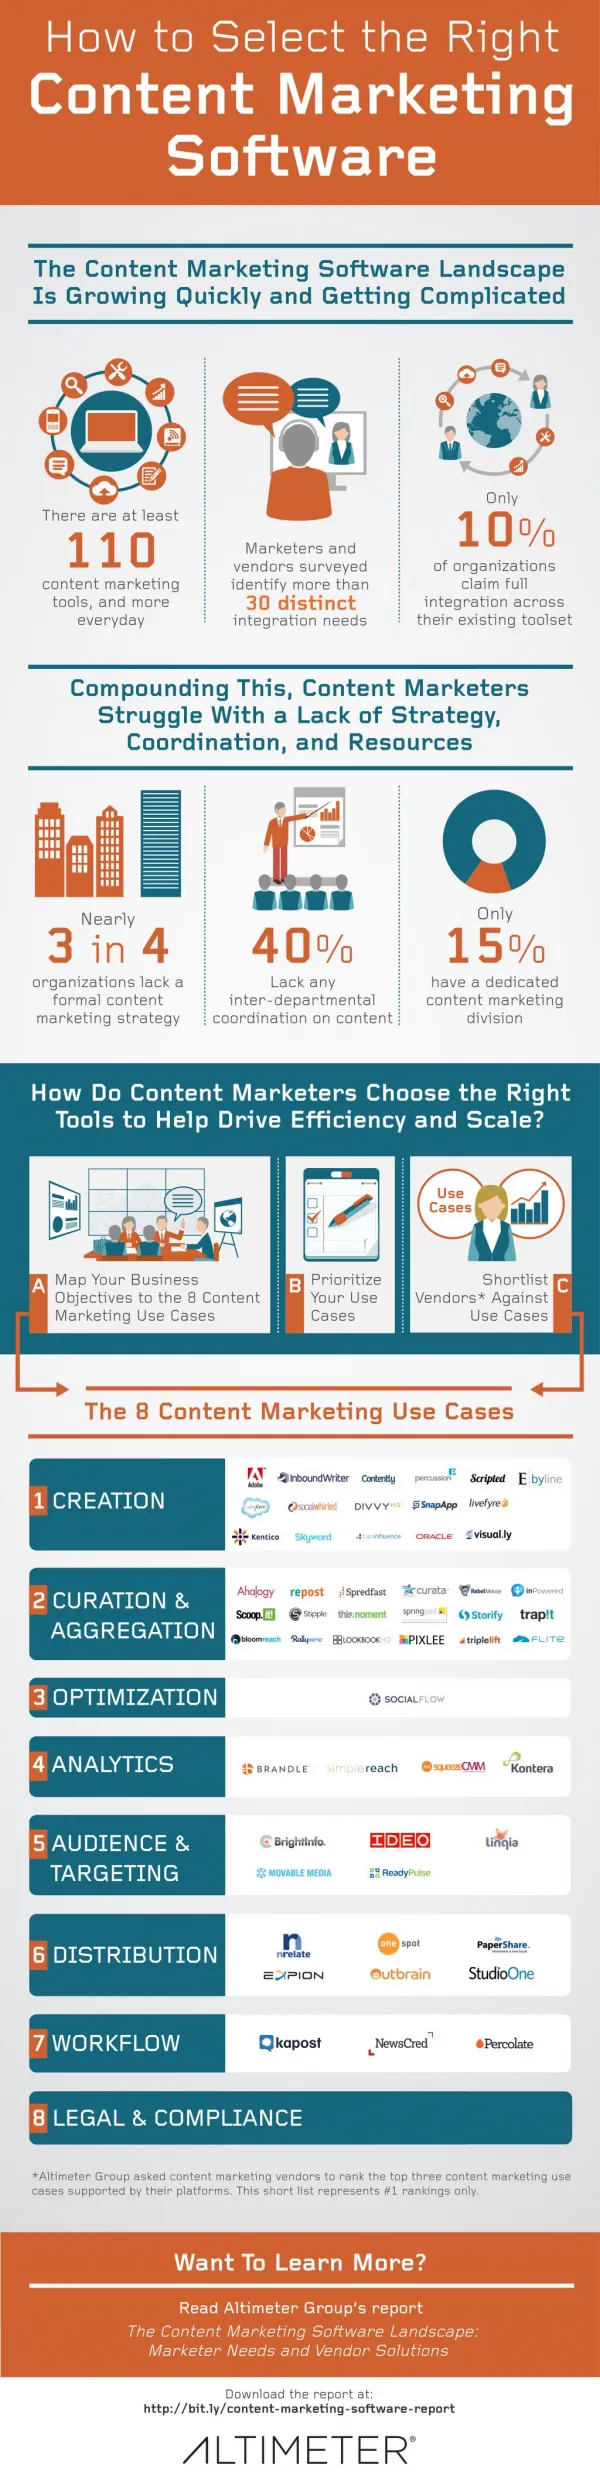 [Infographic] How to Select the Right Content Marketing Software, by Altimeter Group